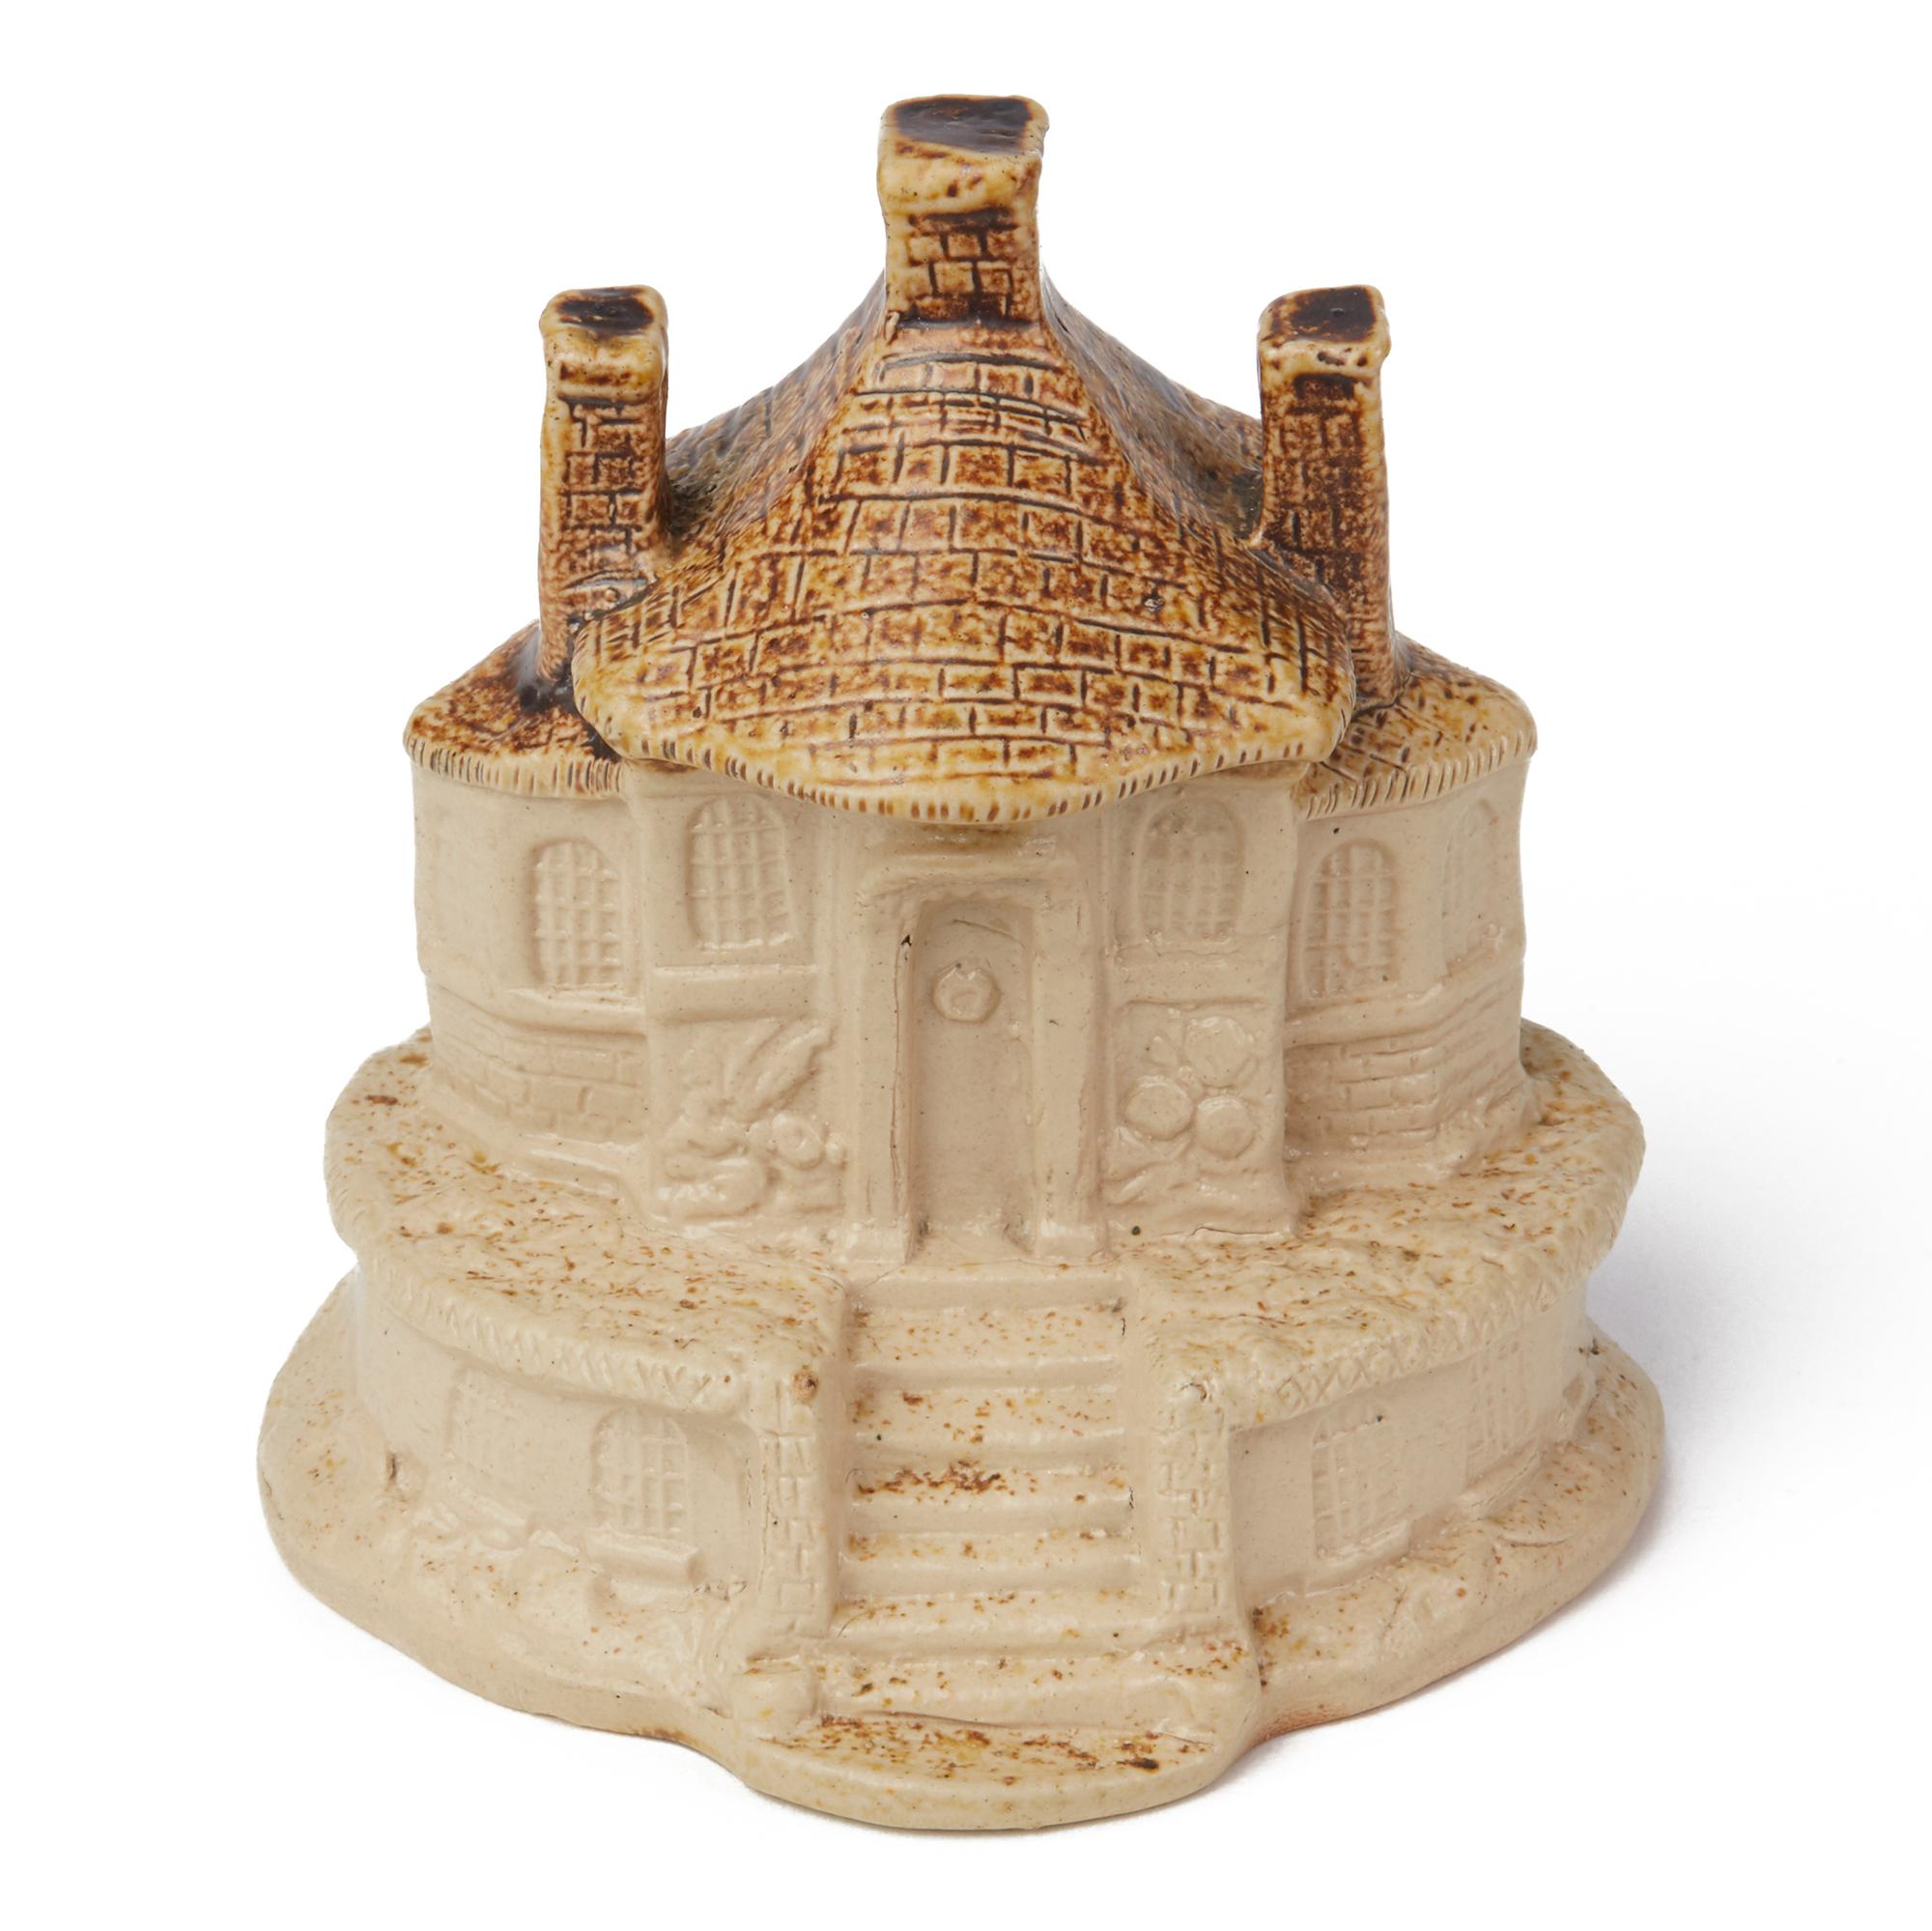 A rare antique Brampton, Derbyshire, salt glazed stoneware model of a cottage raised on an oval shaped base with good detail with a natural salt glazed finish the roof with a contrasting brown glaze. The model is not marked and dates between